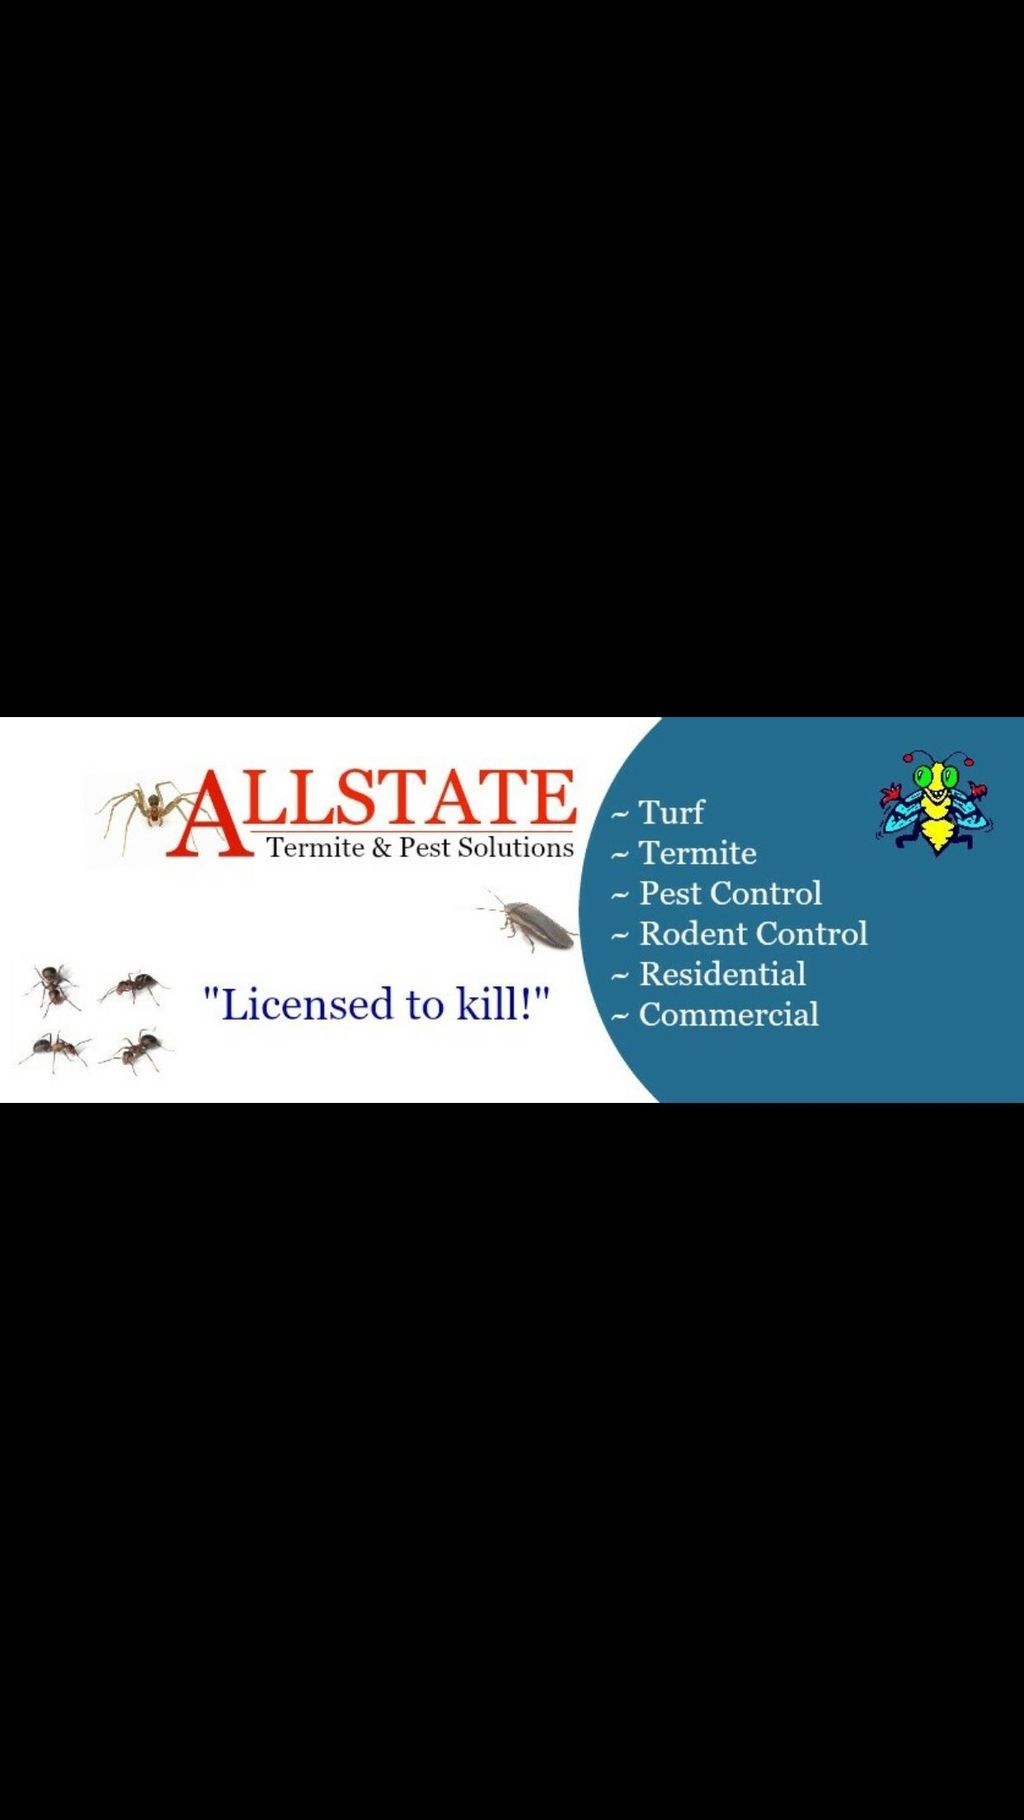 Allstate Termite and Pest Solutions